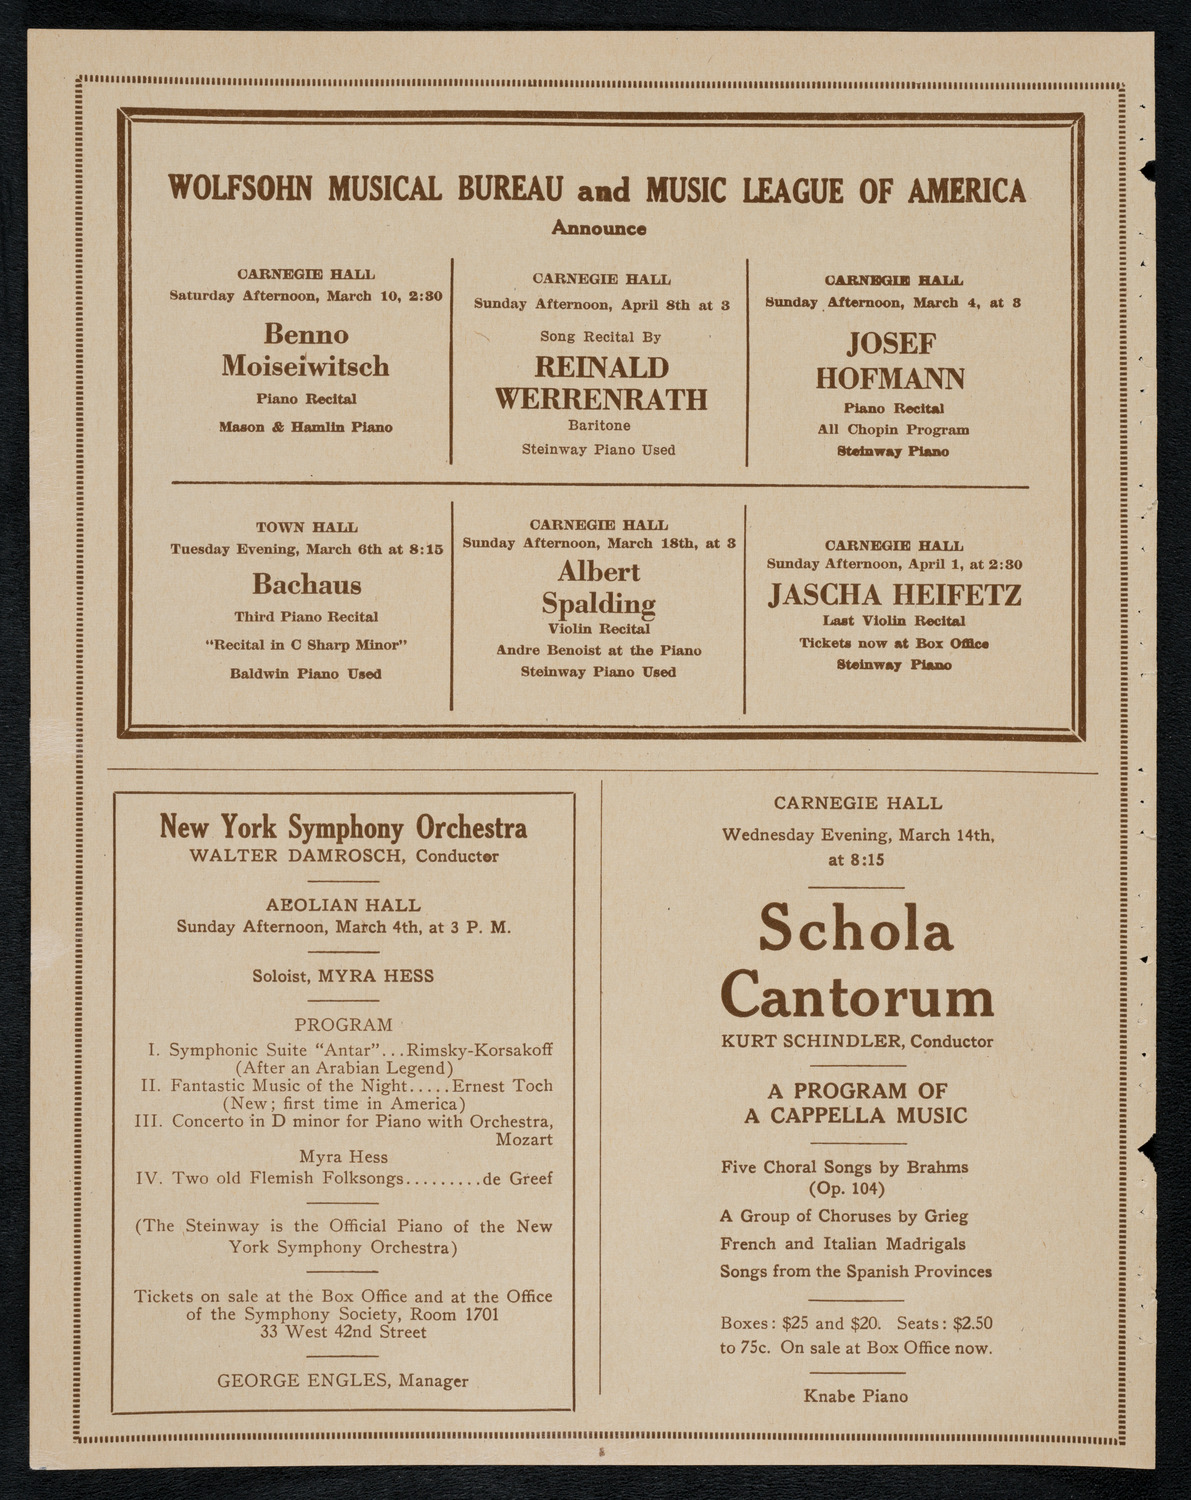 Universal Negro Improvement Association Meeting and Concert, February 23, 1923, program page 8